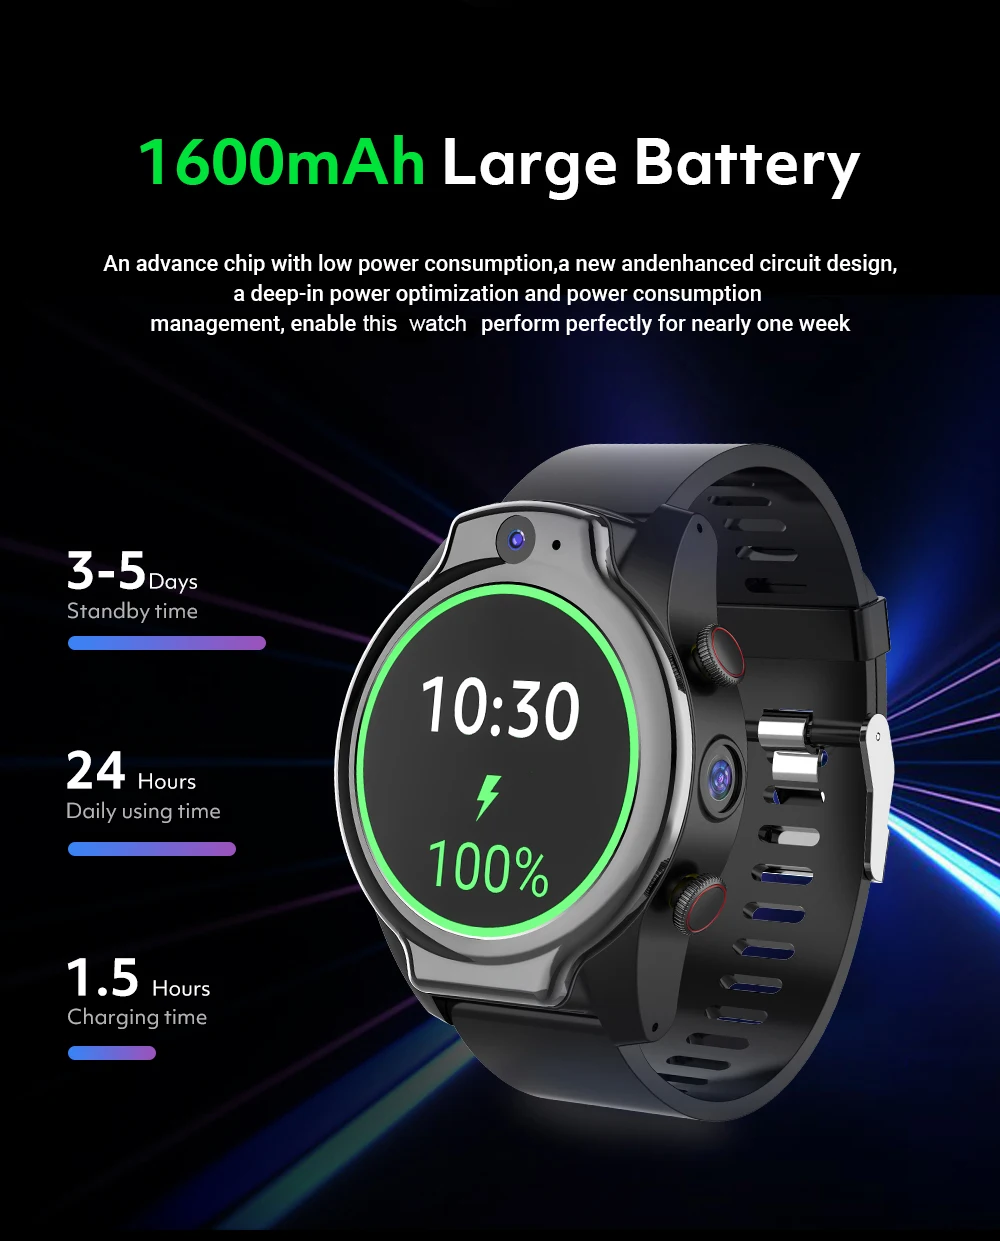 The Android 10 Octa-Core 4G Smart Watch